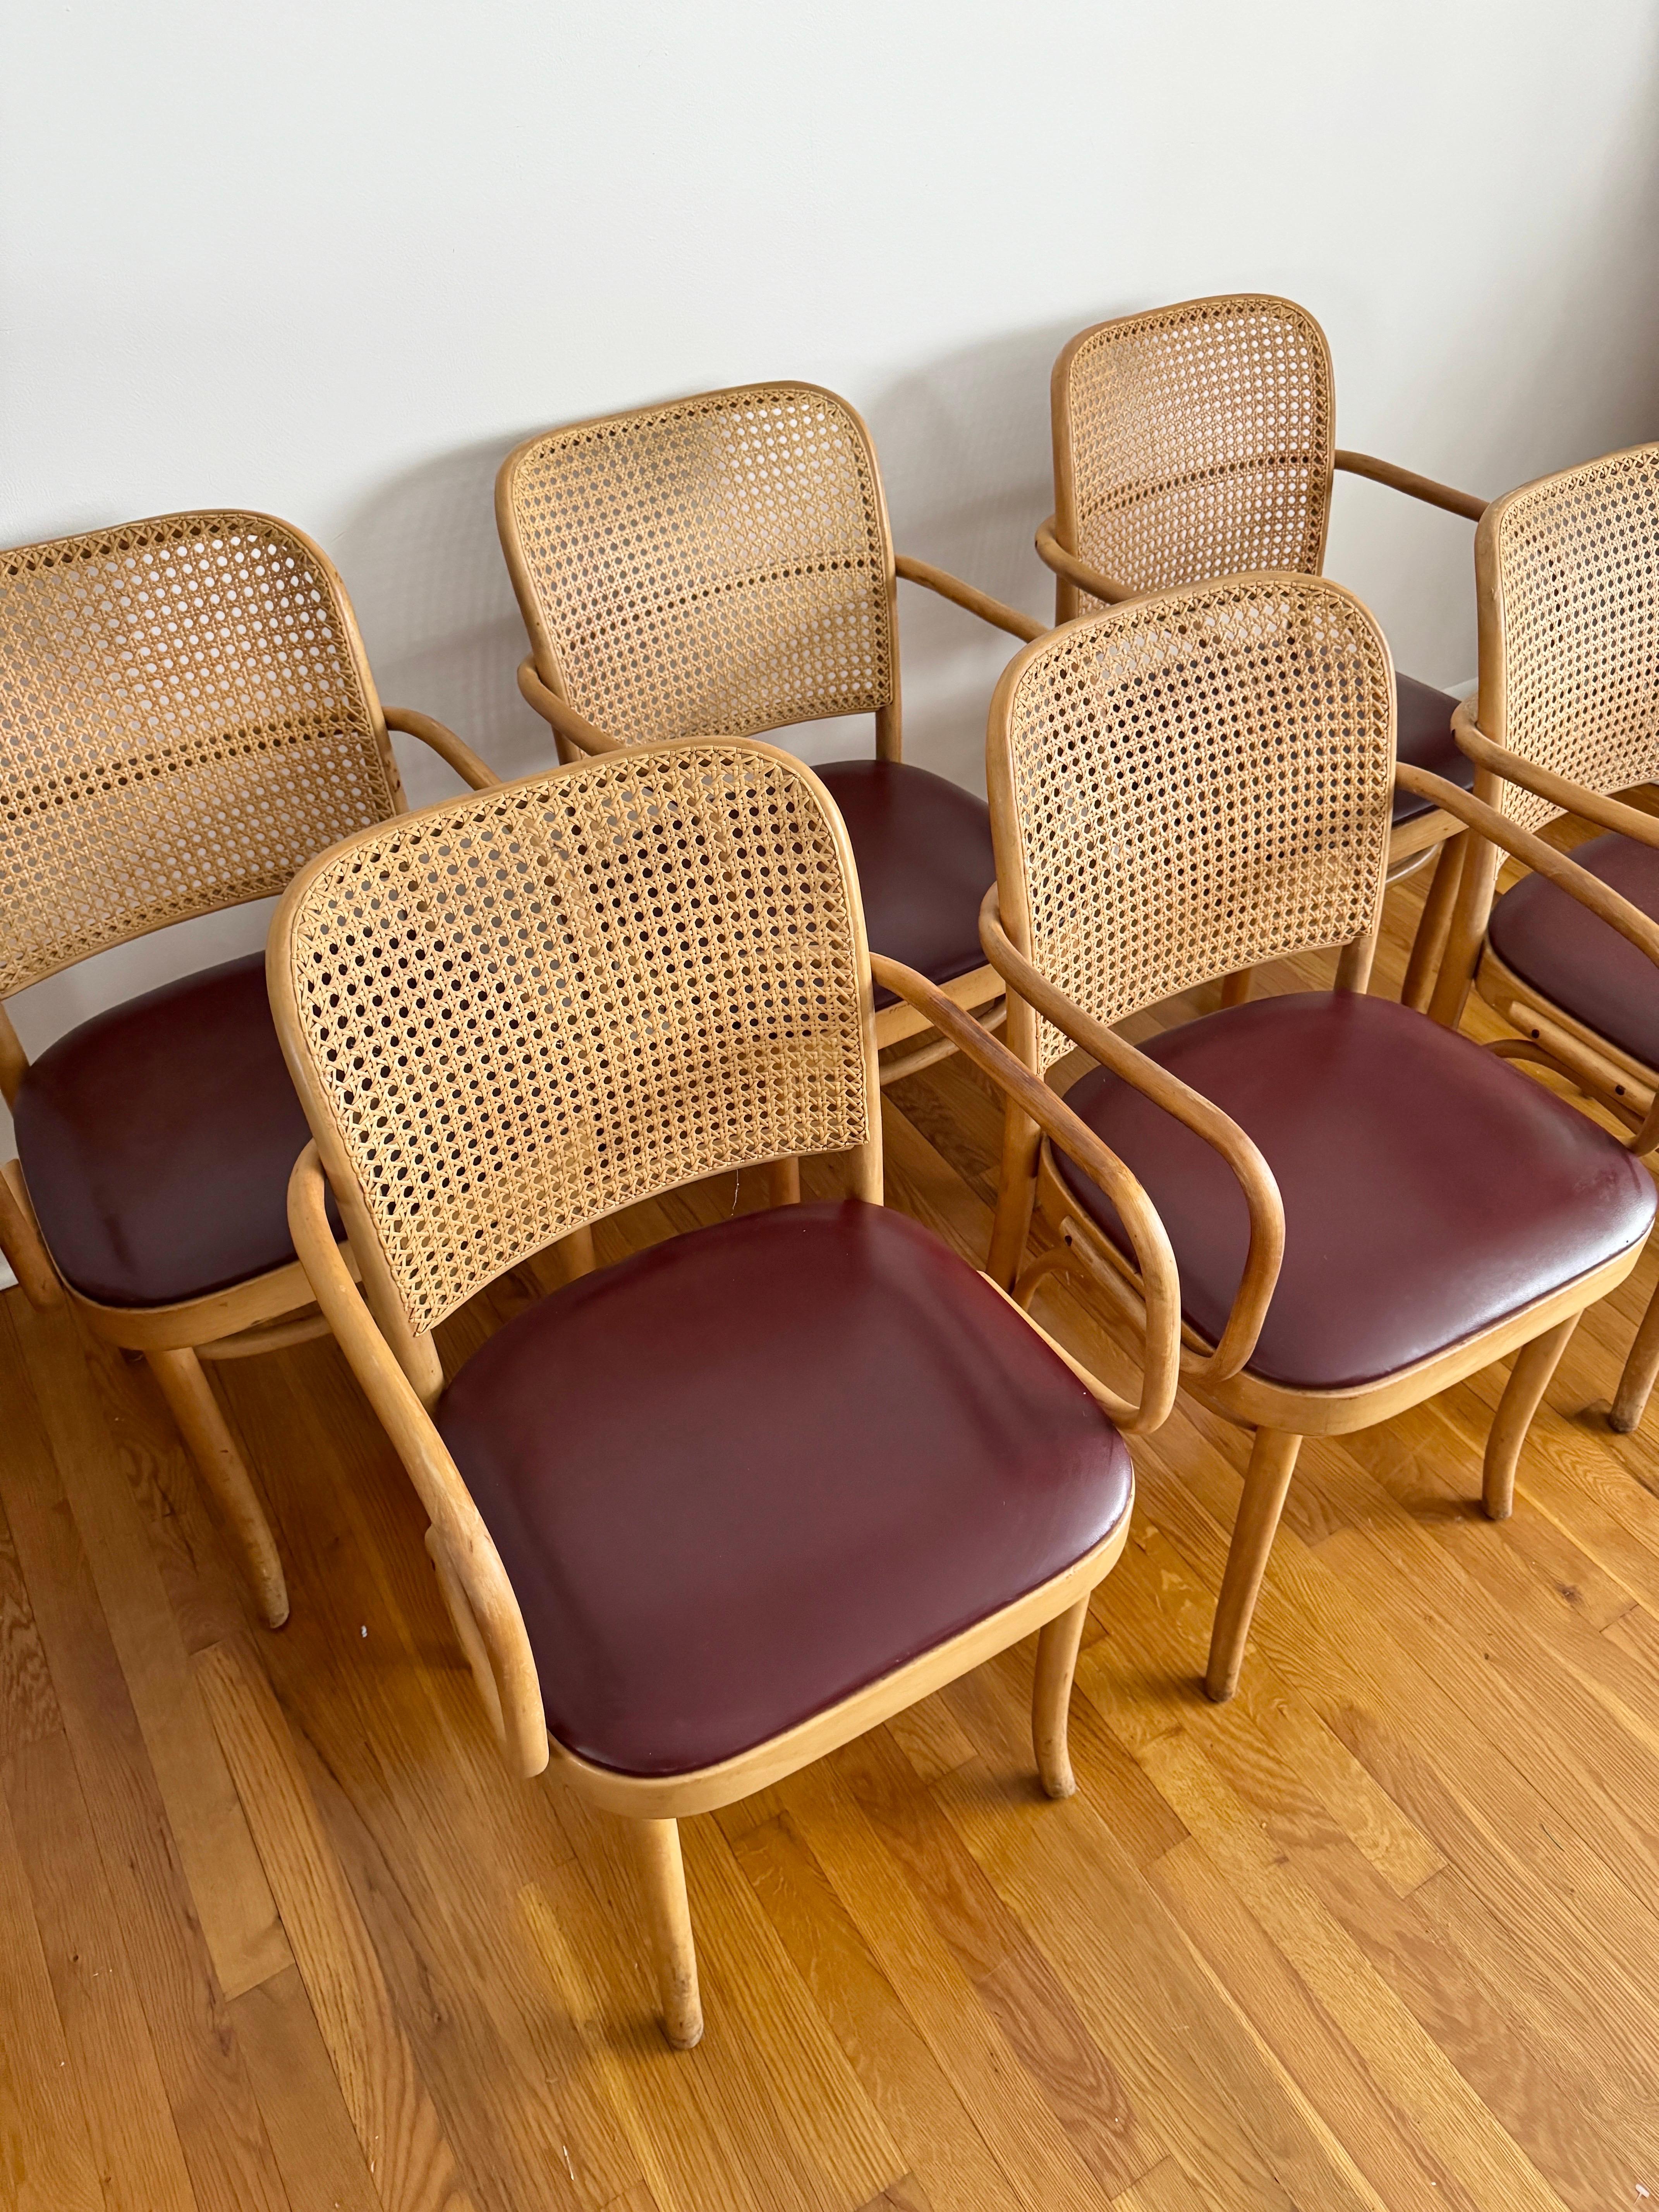 American Mid Century Thonet Style Bentwood Chairs Chairs - Set of 6